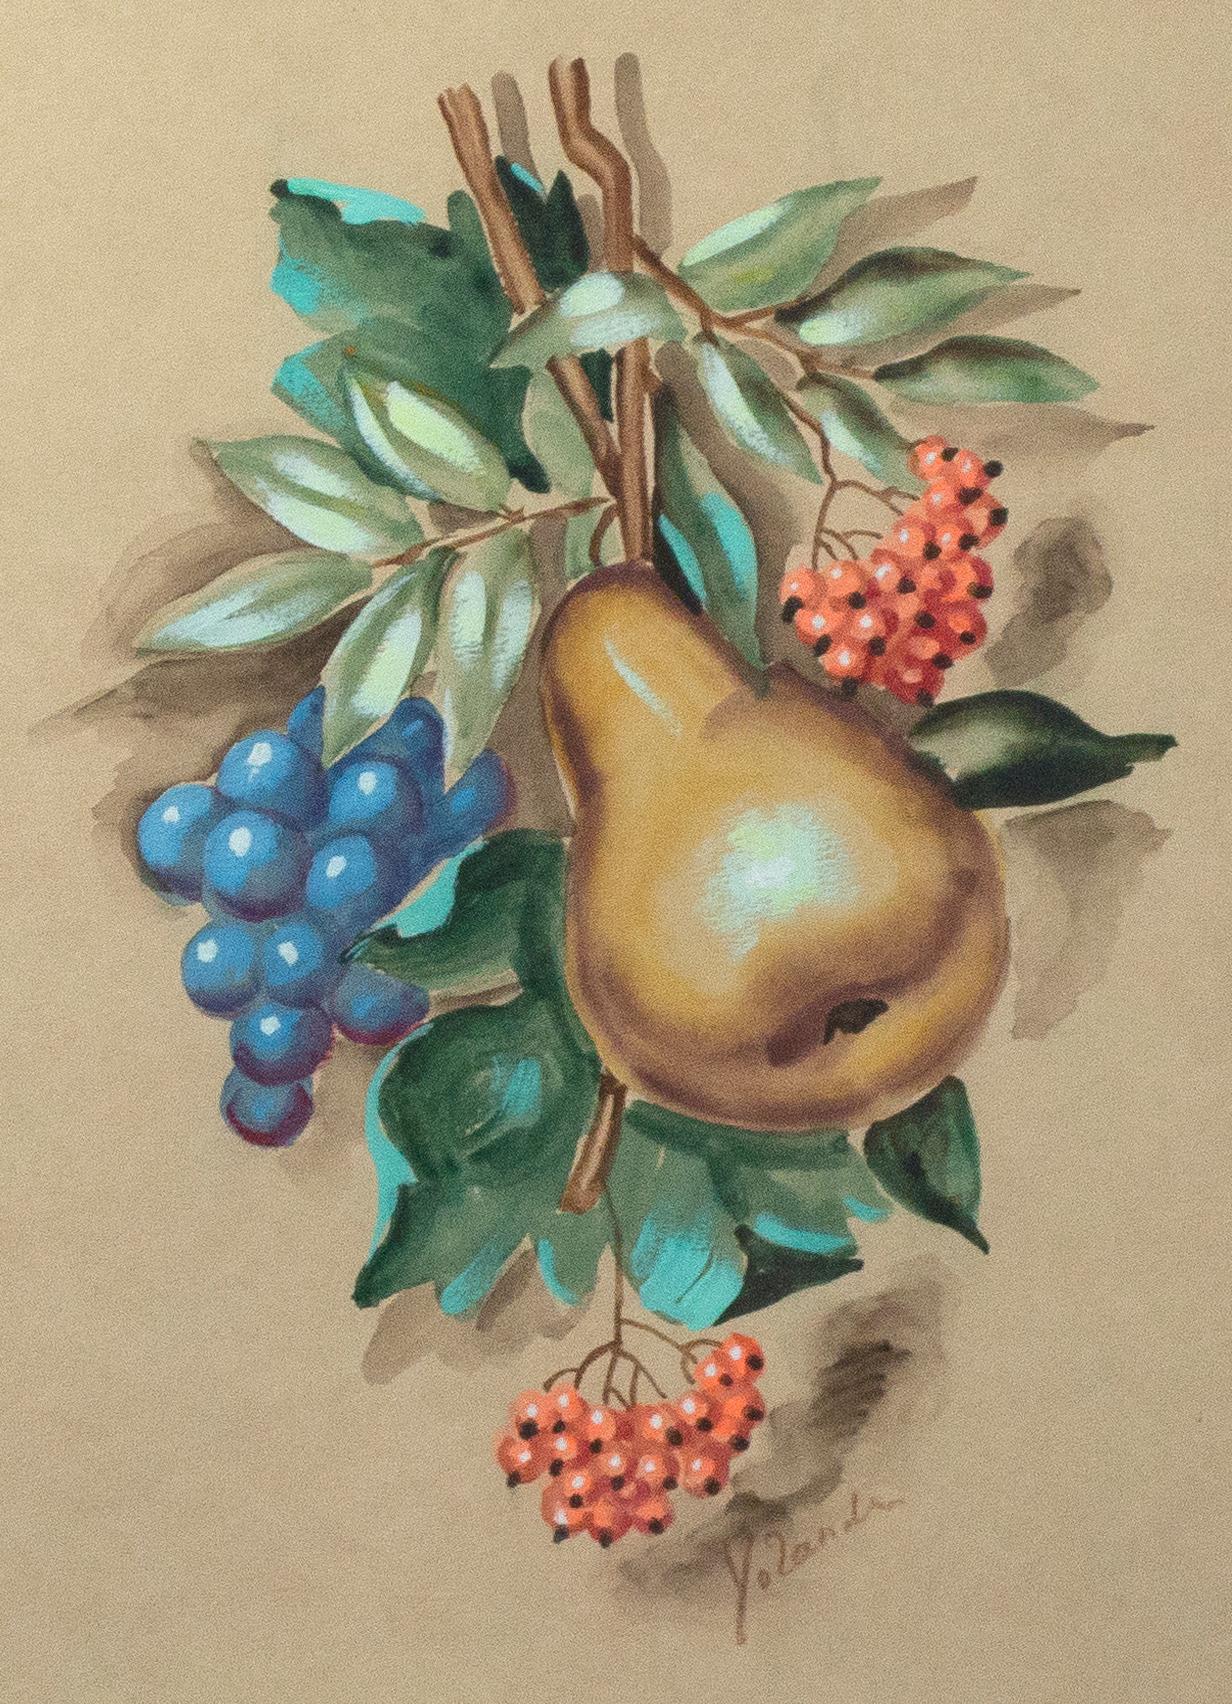 'Fruit Still Life' original watercolor and gouache on board, signed Yolanda - Art by Unknown